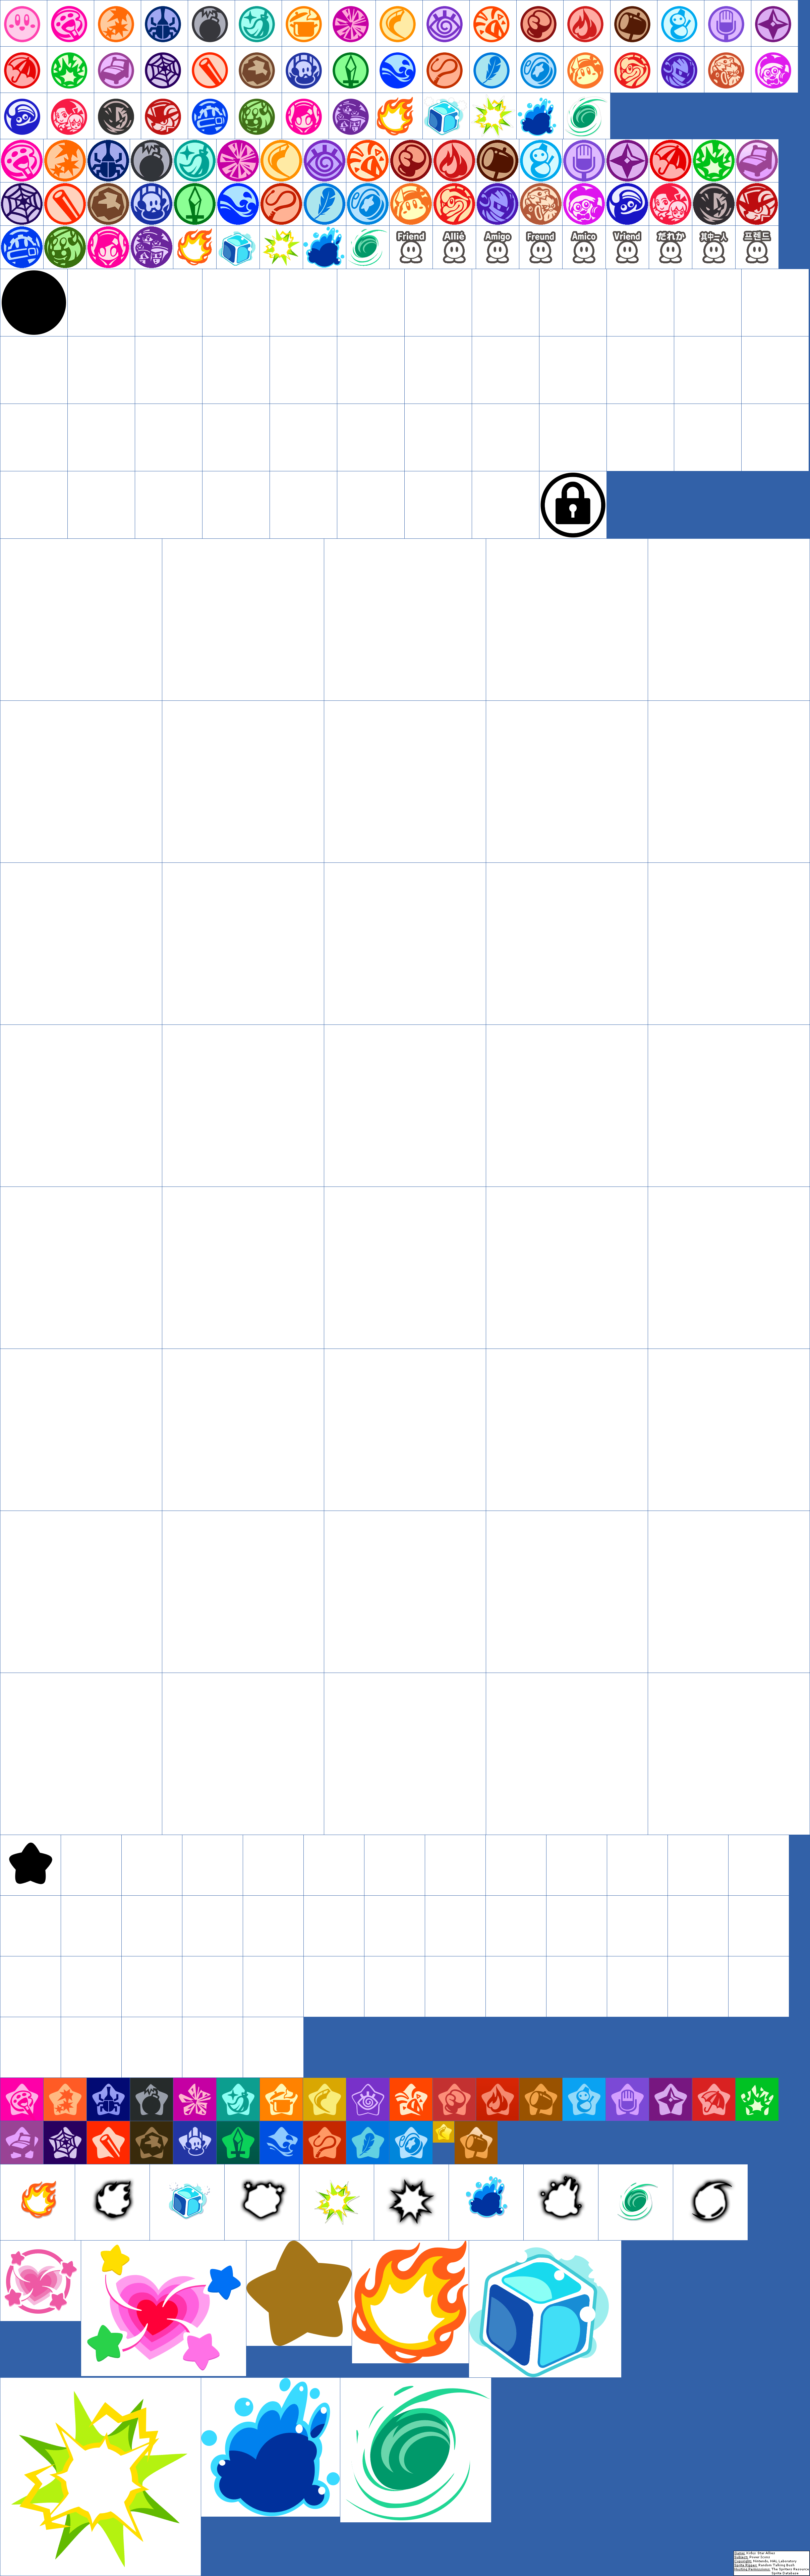 Kirby Star Allies - Power Icons